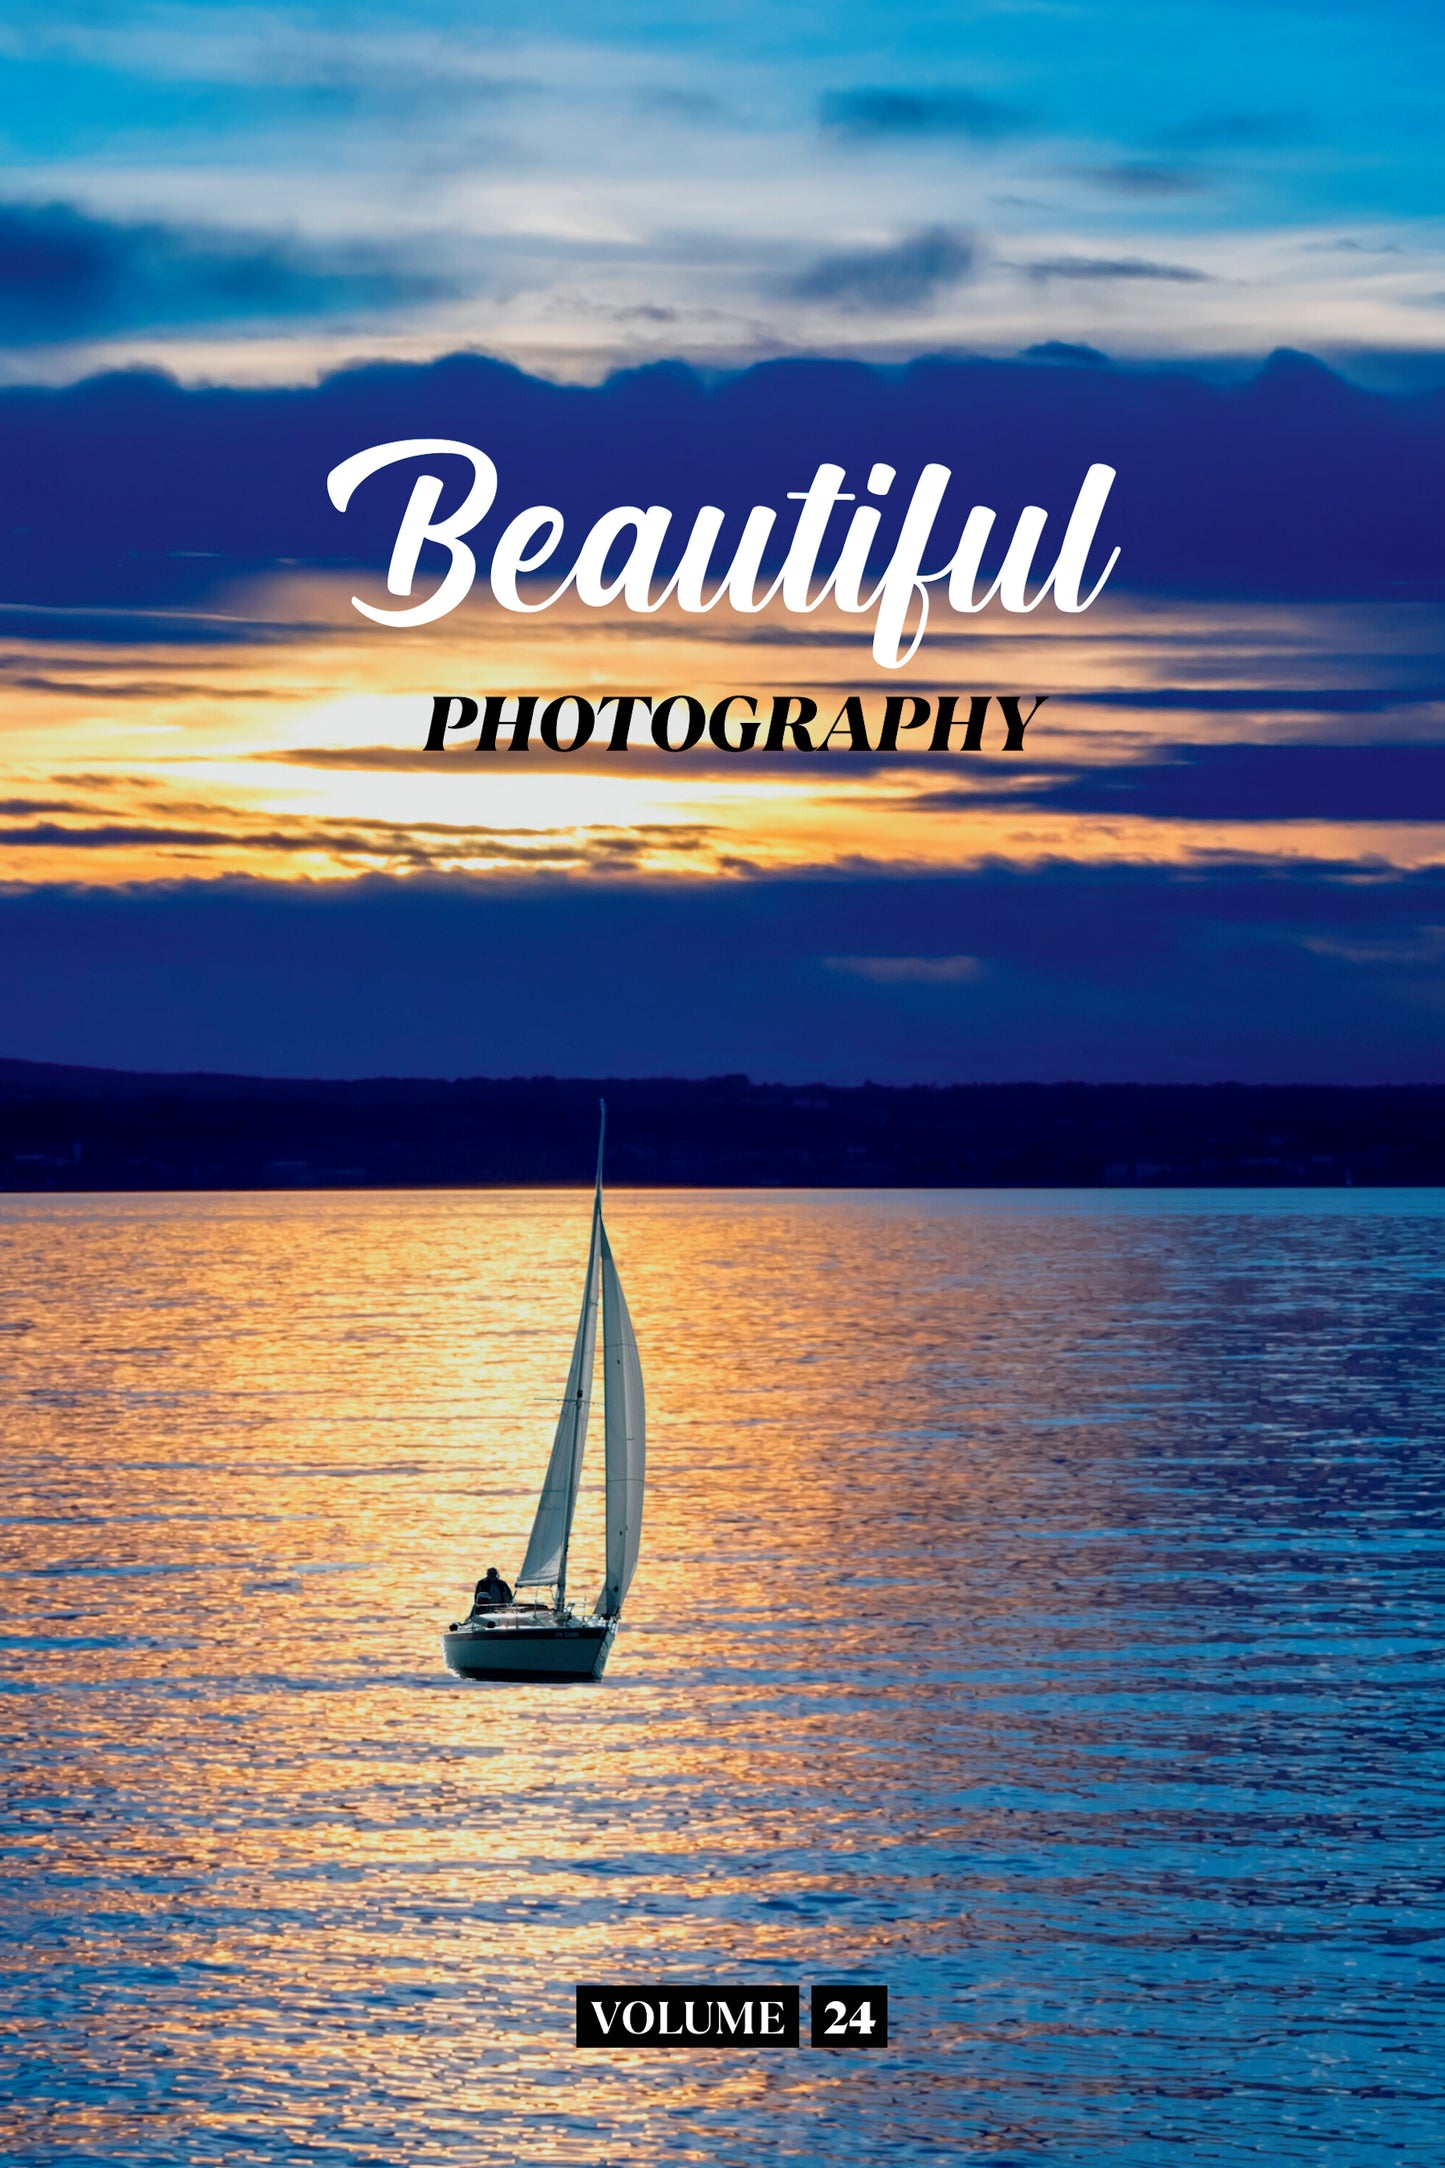 Beautiful Photography Volume 24 (Physical Book Pre-Order)